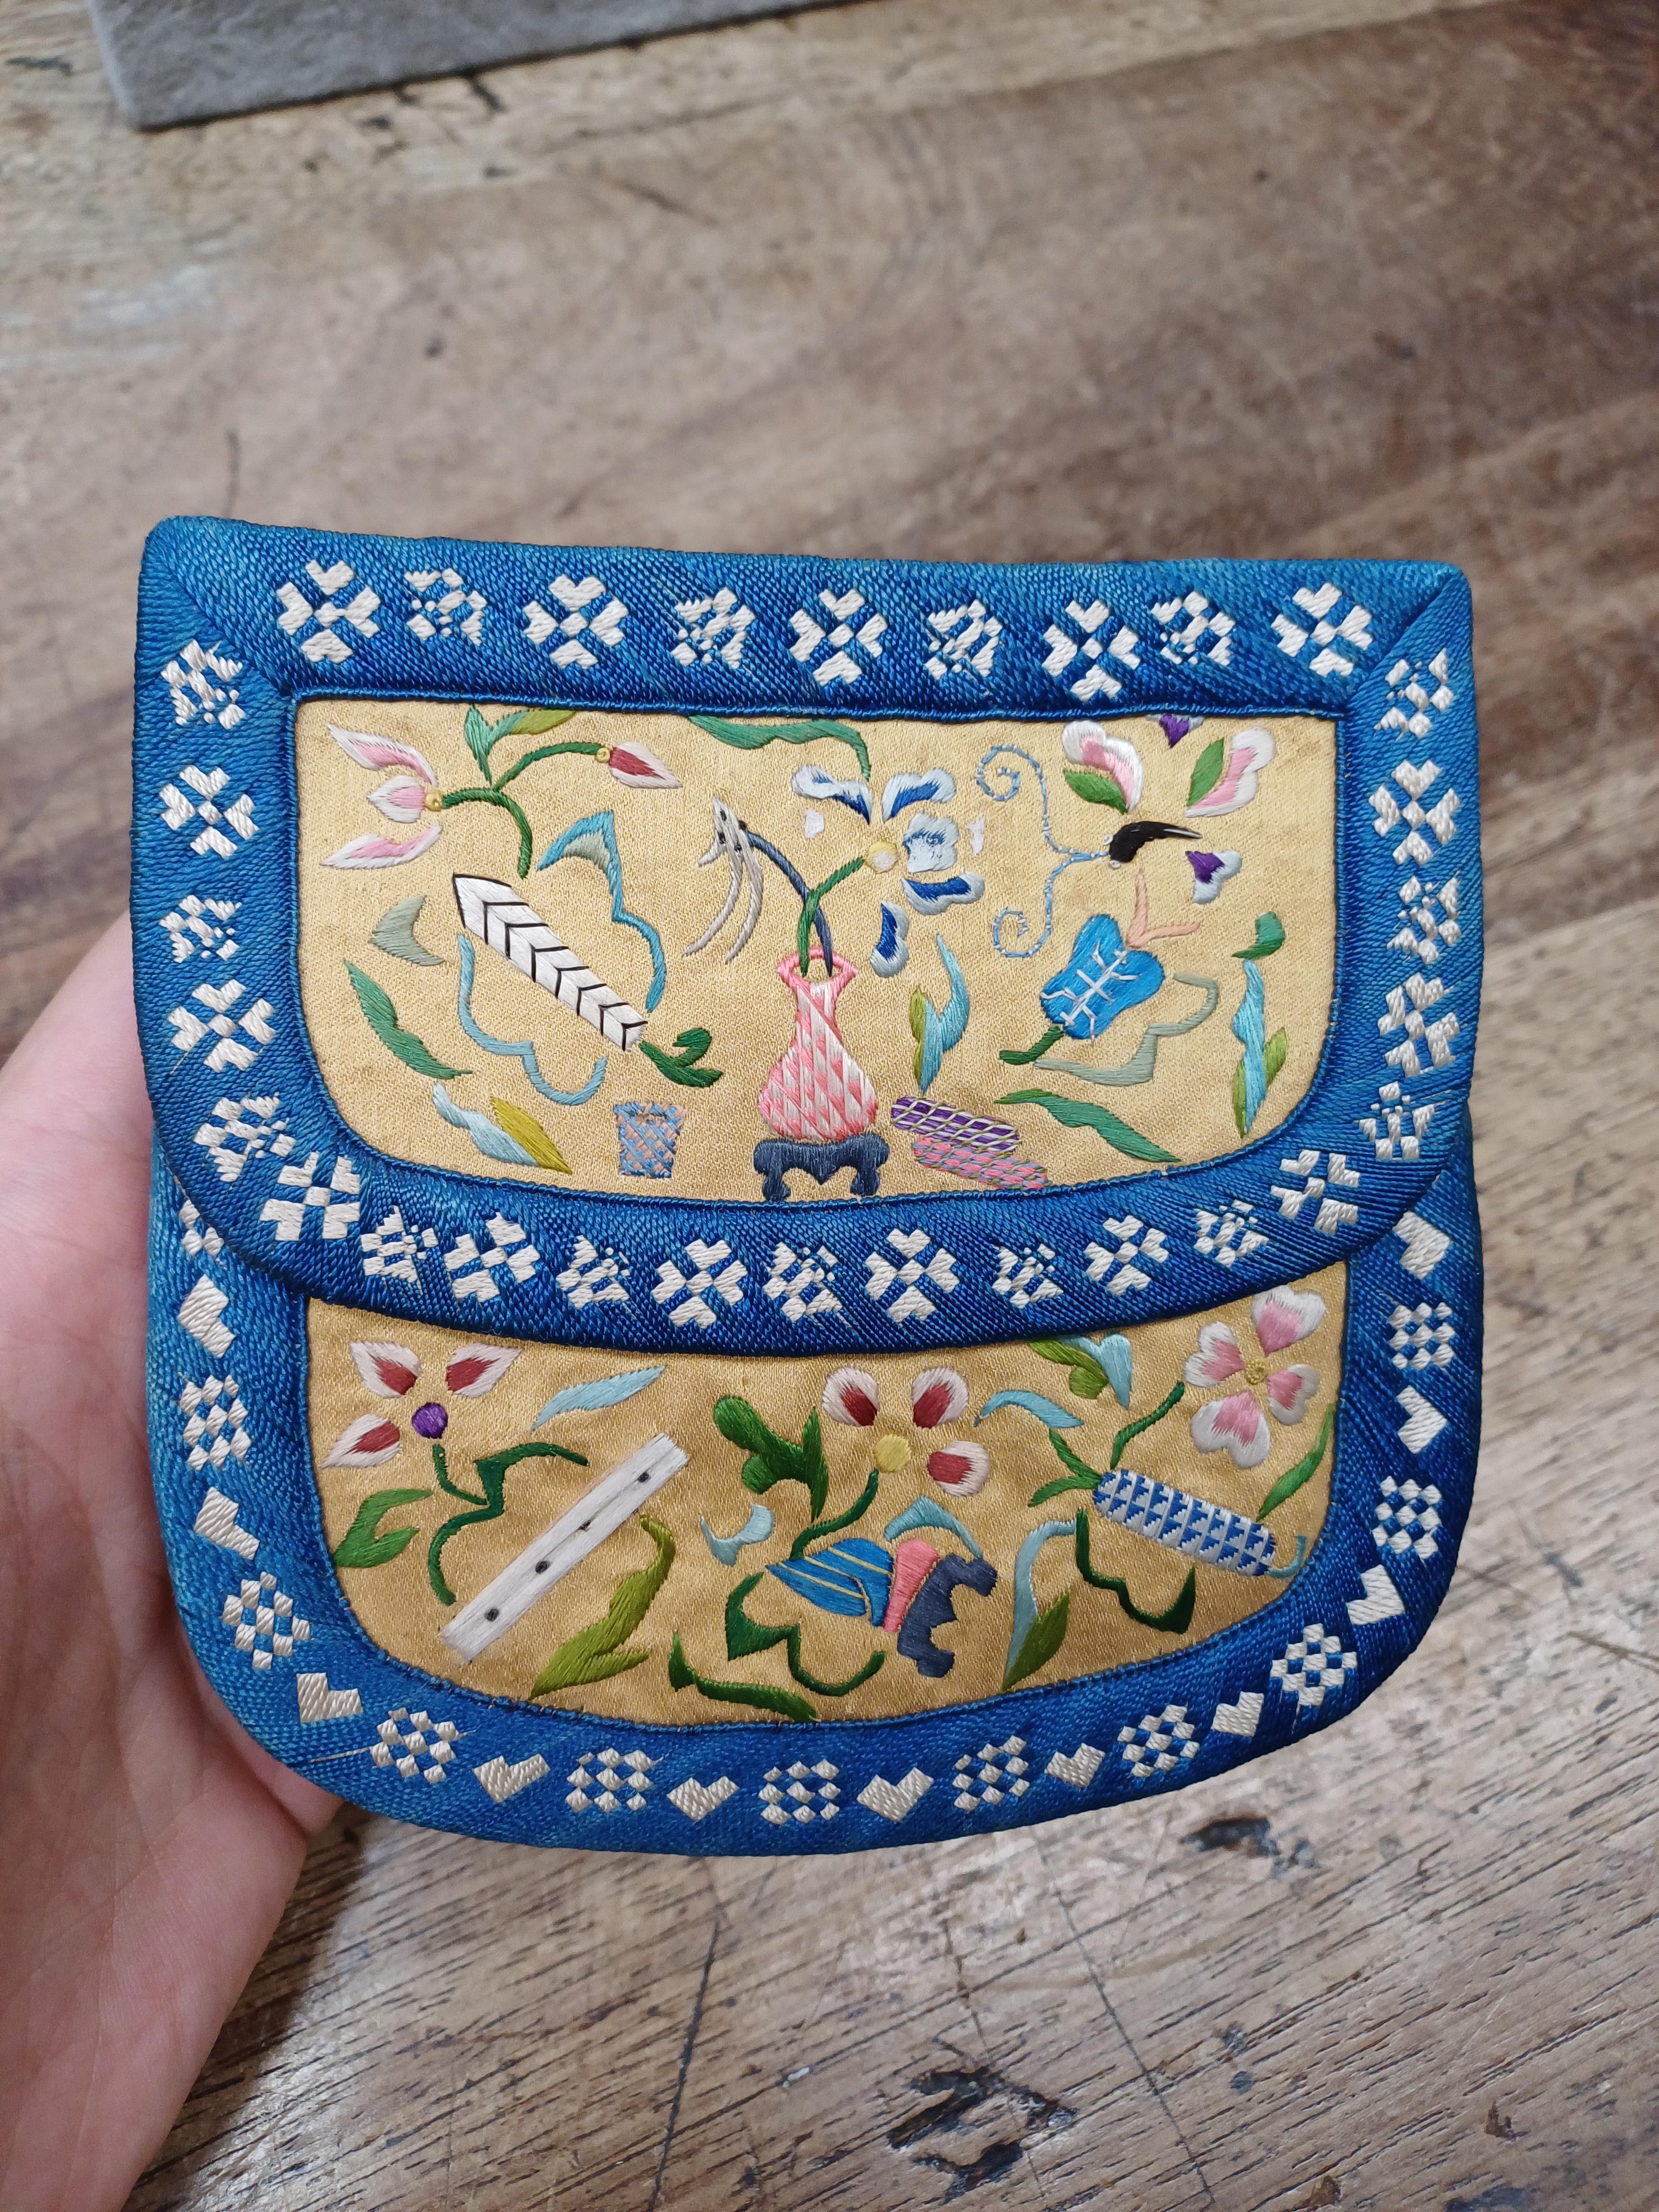 A CHINESE SILK EMBROIDERED PURSE 清十九世紀 絲繡花卉圖紋包 - Image 7 of 10